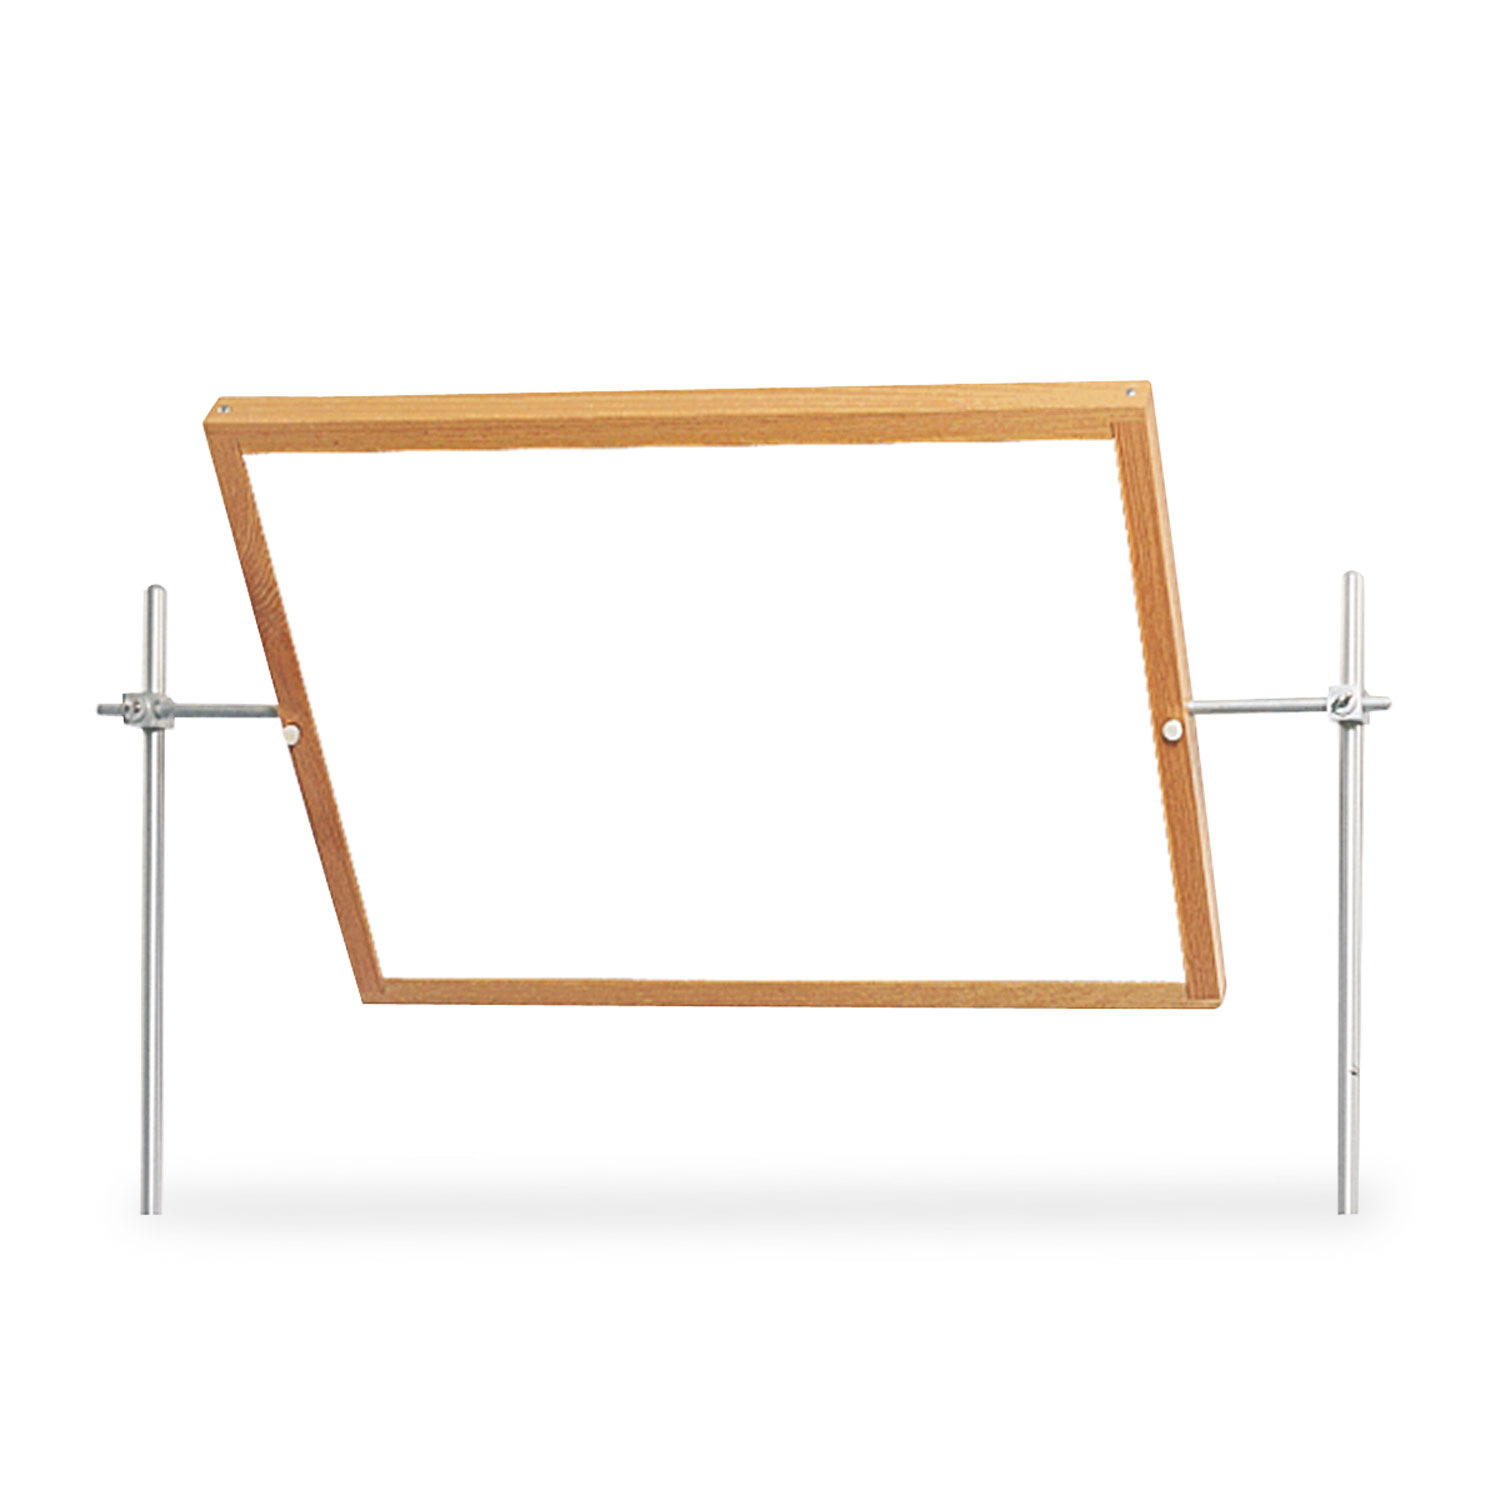  Diversified Woodcrafts 4001K Optional Mirror/Markerboard for Mobile Tables, 27.75w x 1.5d x 20.75h, Mirror (DVW4001K) 